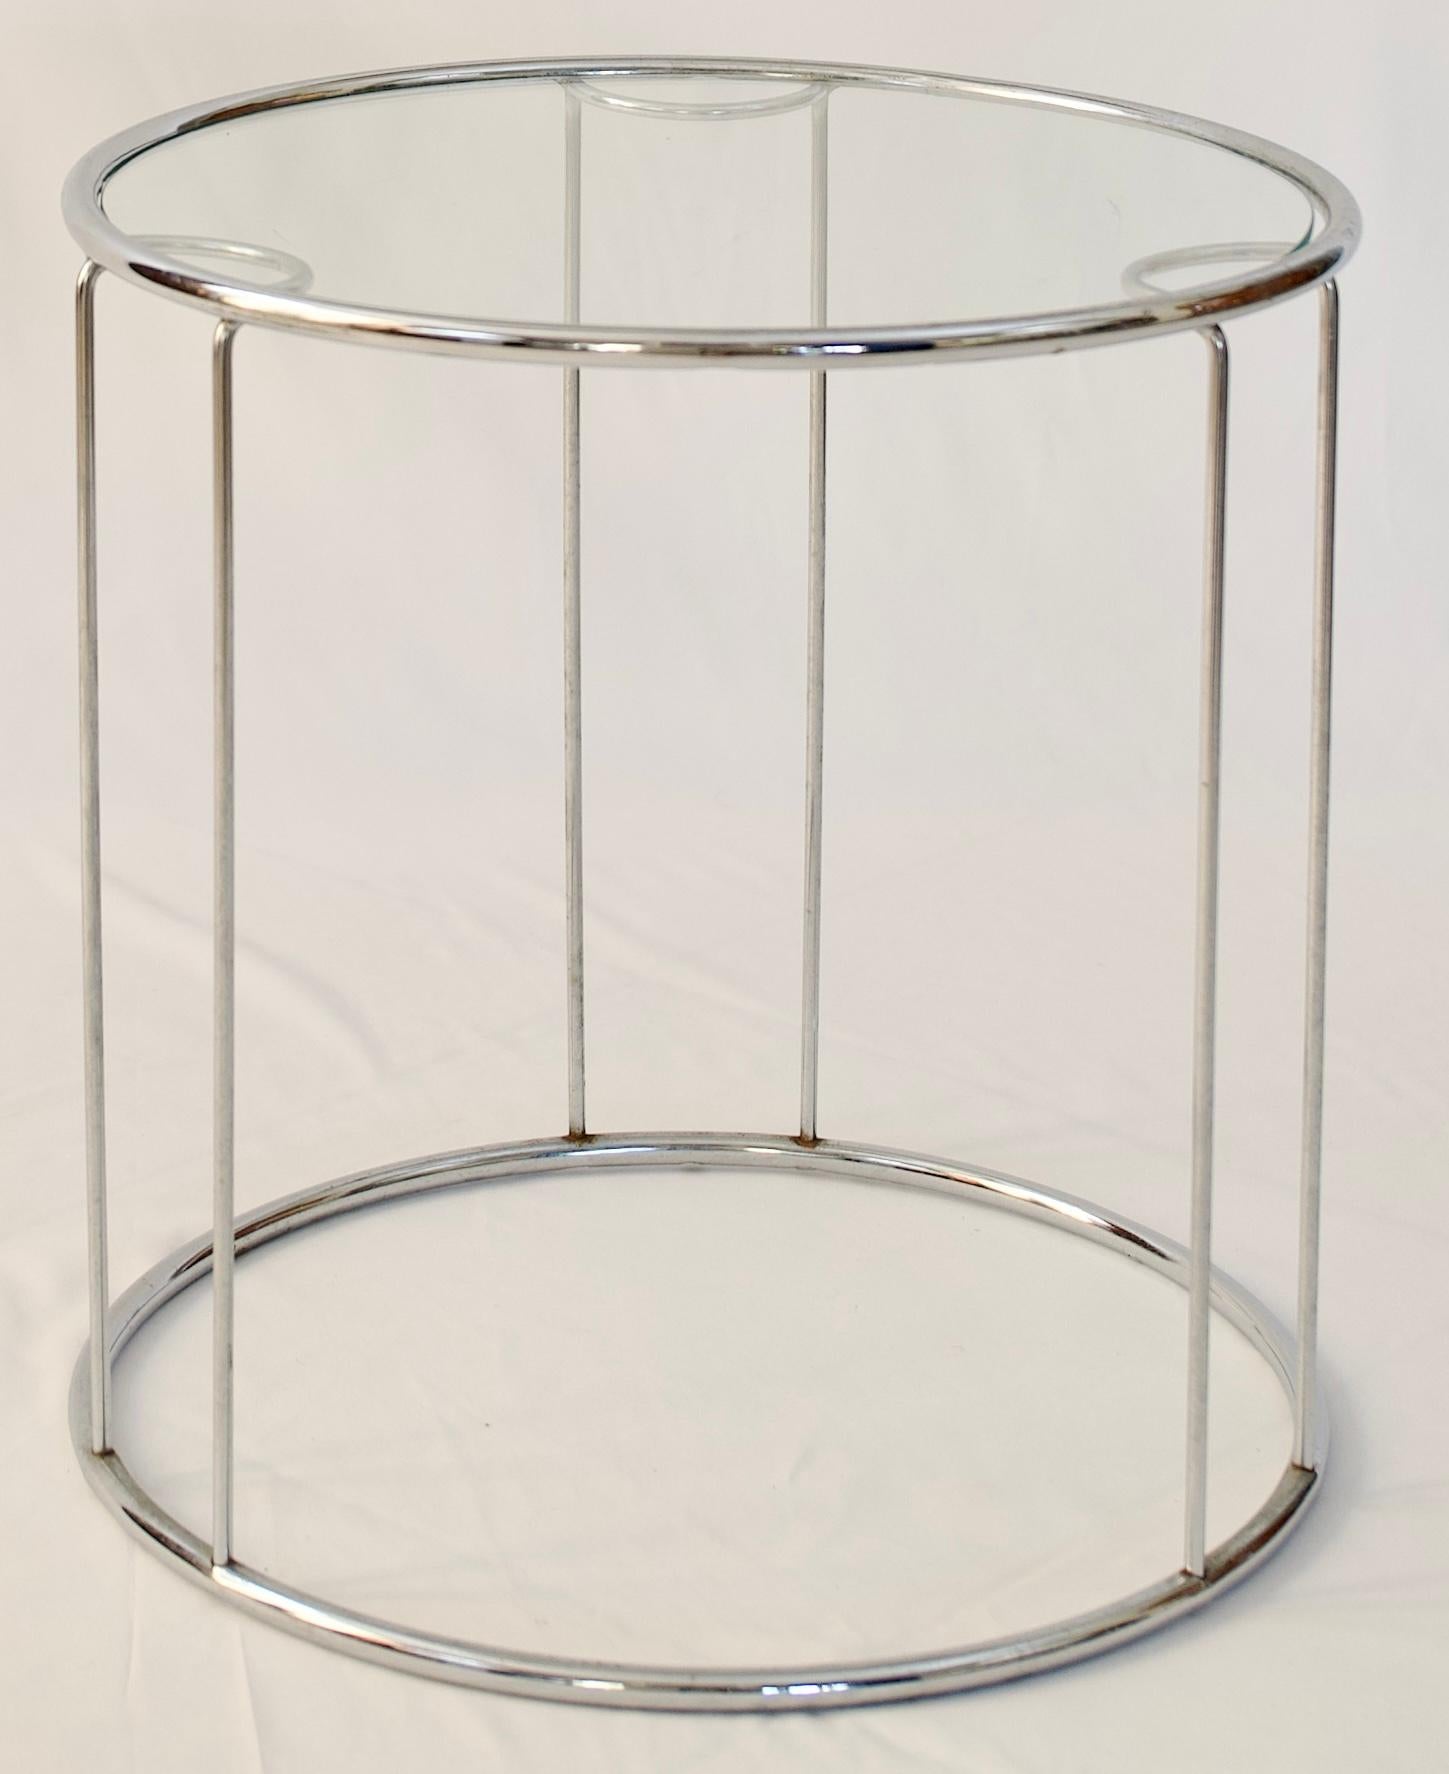 Hollywood Regency Set of Three Round Chrome and Glass Nesting End Tables Milo Baughman Style For Sale